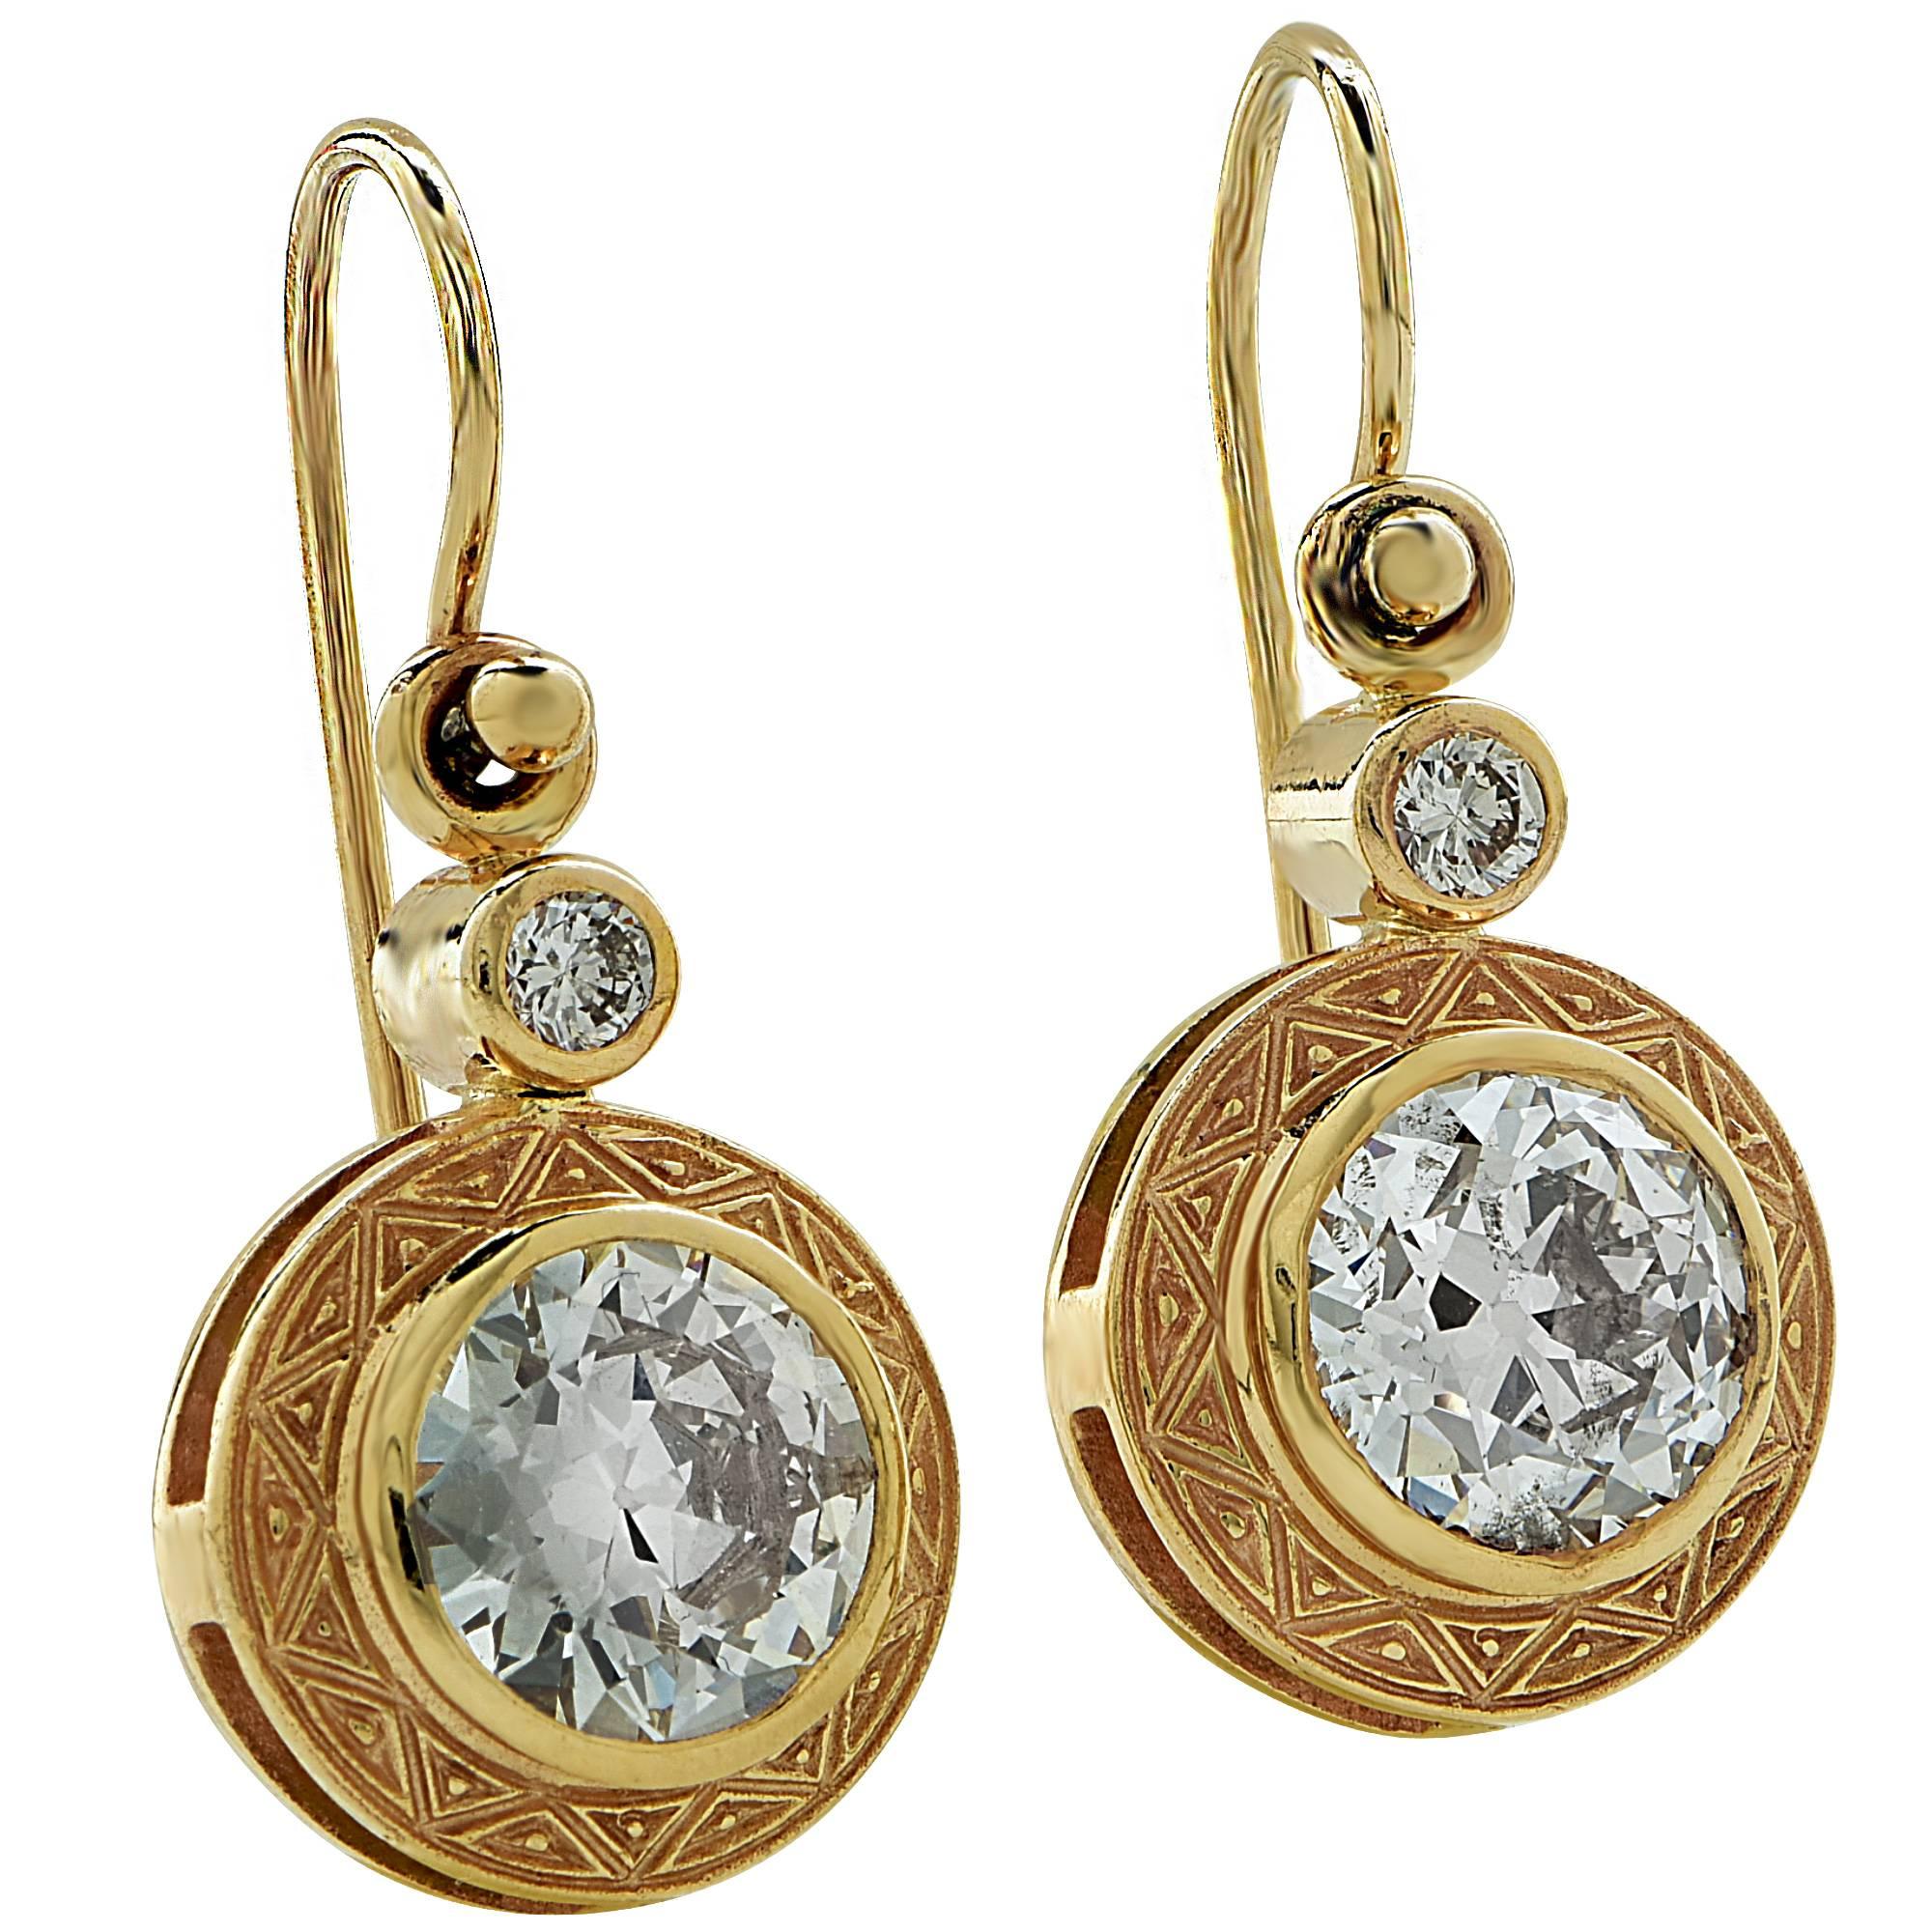 Yellow gold earring containing 2 European cut diamonds weighing approximately 3ct total H-I color and VS2-SI2 clarity accented by 2 round brilliant cut diamonds weighing approximately .15cts.

It is stamped and tested as 18k gold.
The metal